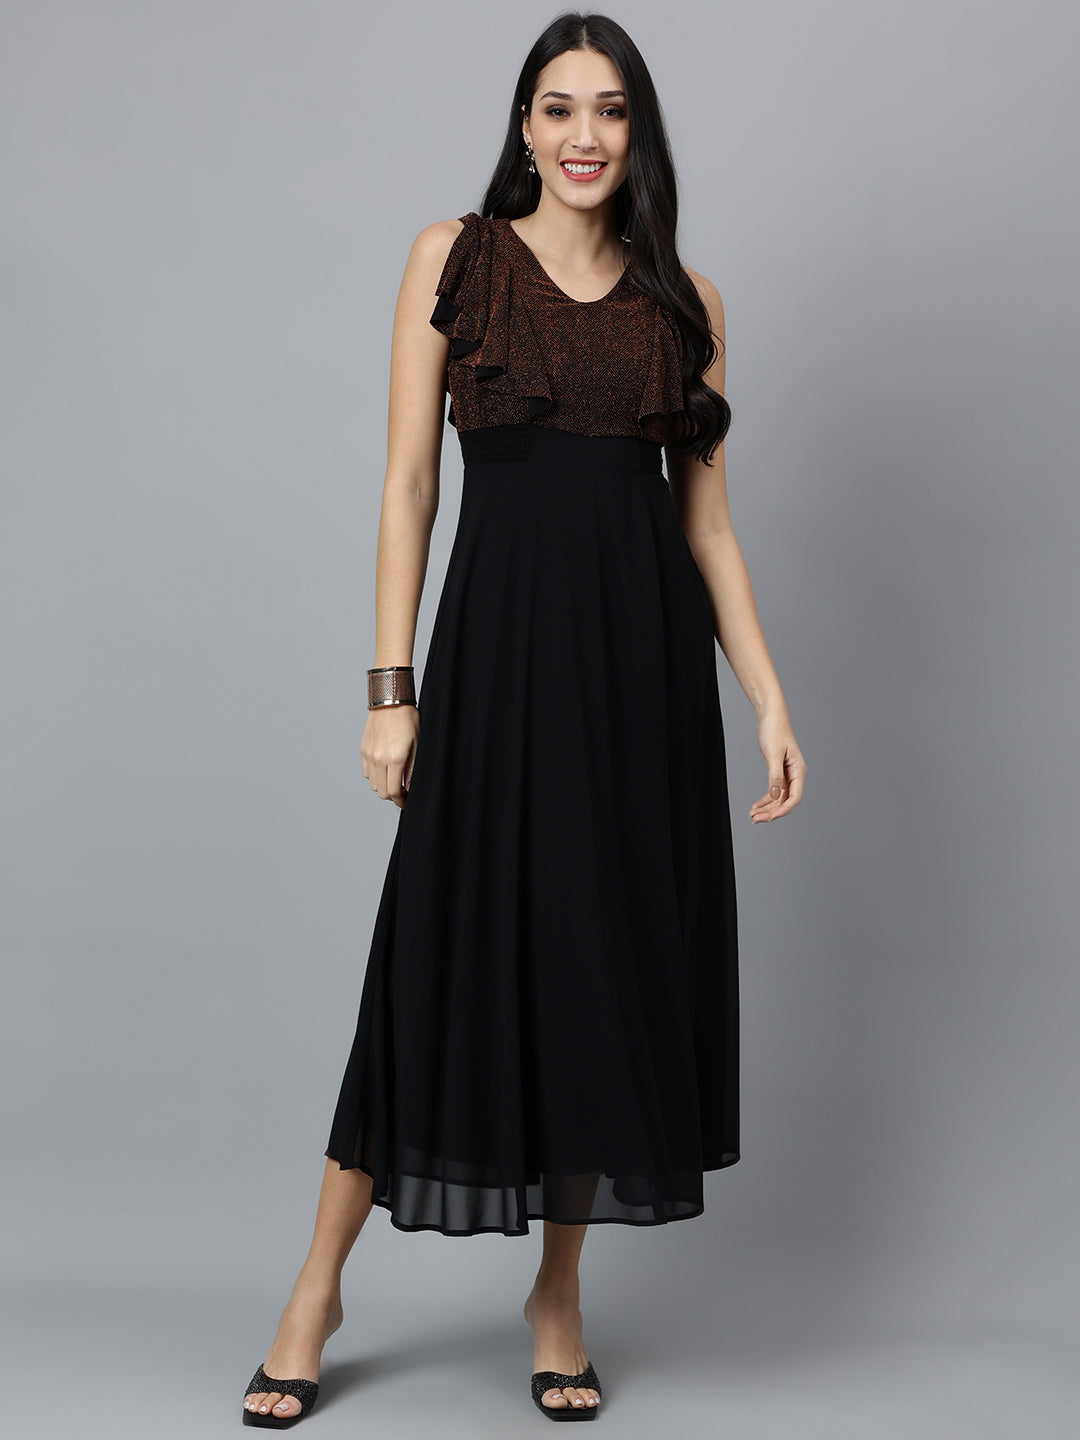 Copper Solid Cap Sleeve Party Dress